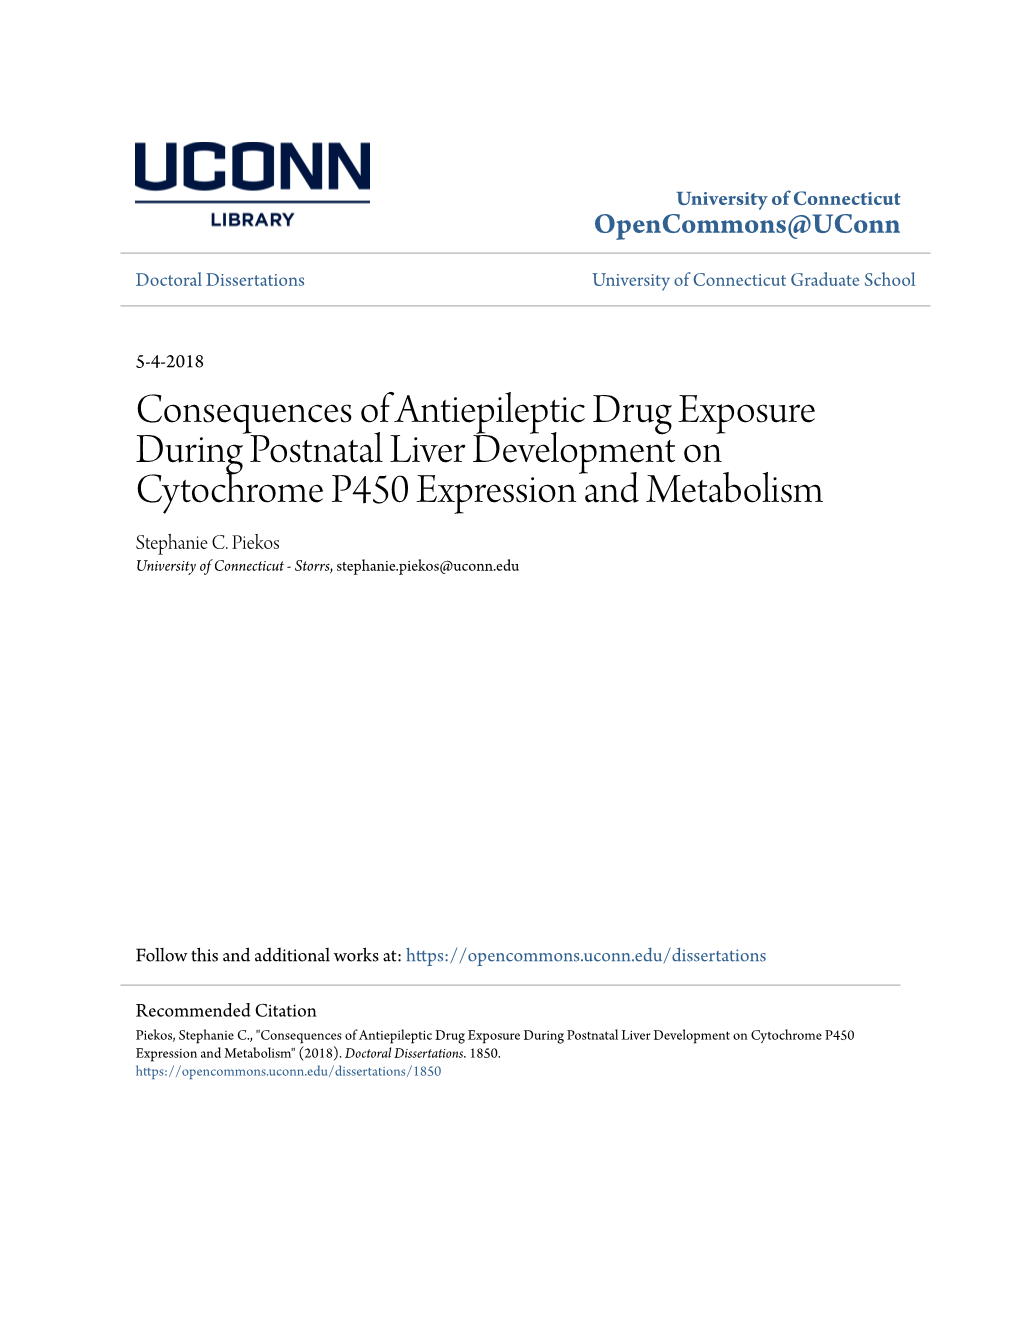 Consequences of Antiepileptic Drug Exposure During Postnatal Liver Development on Cytochrome P450 Expression and Metabolism Stephanie C